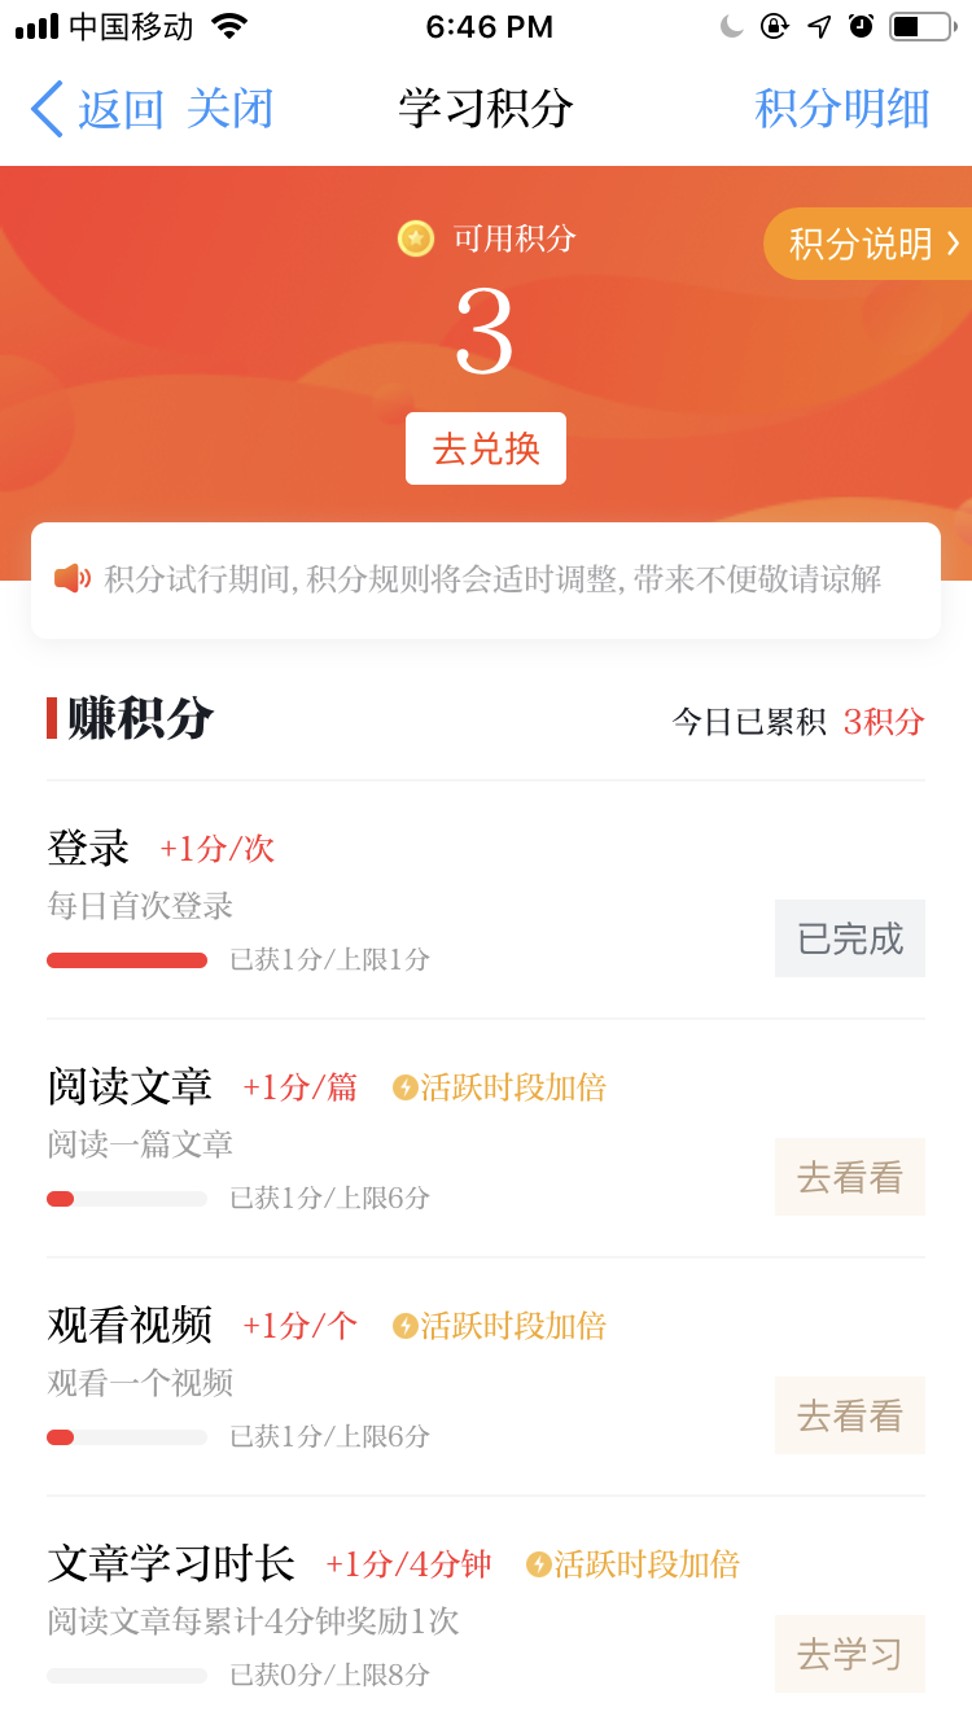 A screenshot of the Xuexi Qiangguo app, which enabled users to earn “study points” for reading articles, making comments every day and taking multiple-choice tests about Communist Party policies.